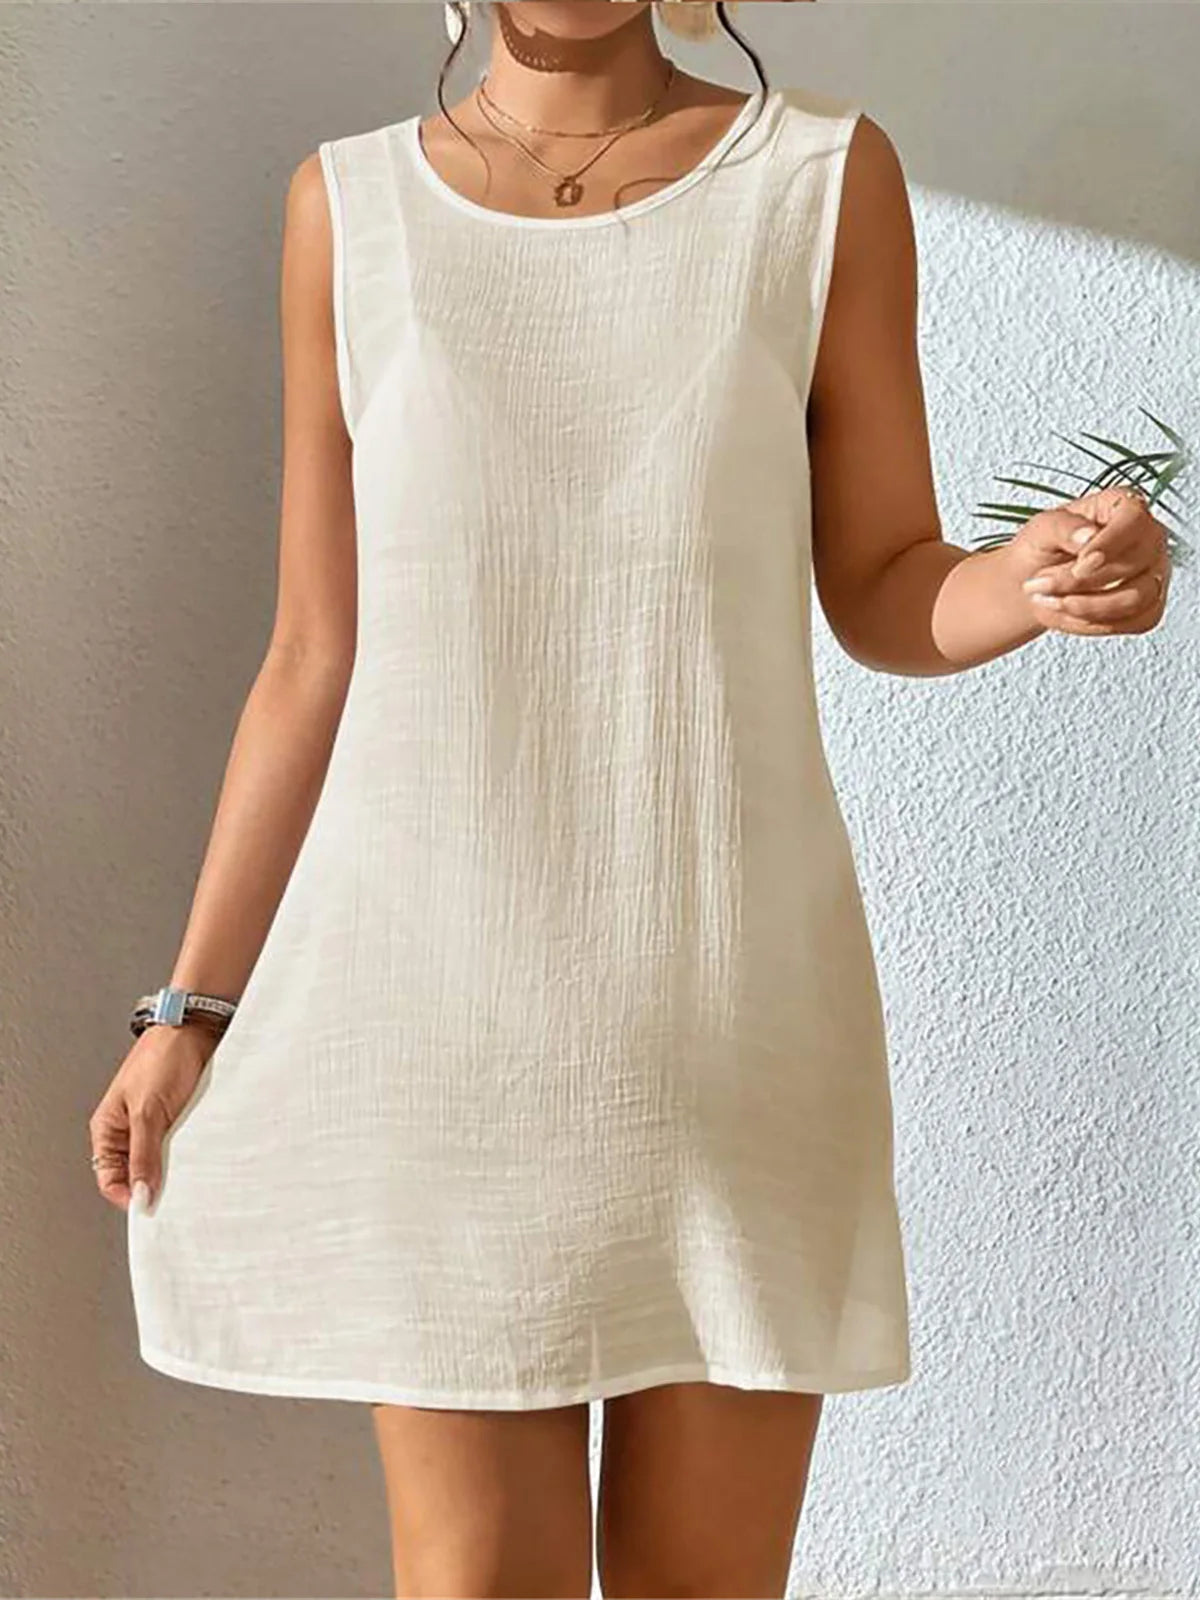 5 Colors Backless Crochet Tunic Beach Cover Up Available in Beige, Black, White, Pink, and Green, Made of Nylon, Polyester, Cotton, Fits True to Size for Women aged 18-35, Available in Stock with Free Shipping